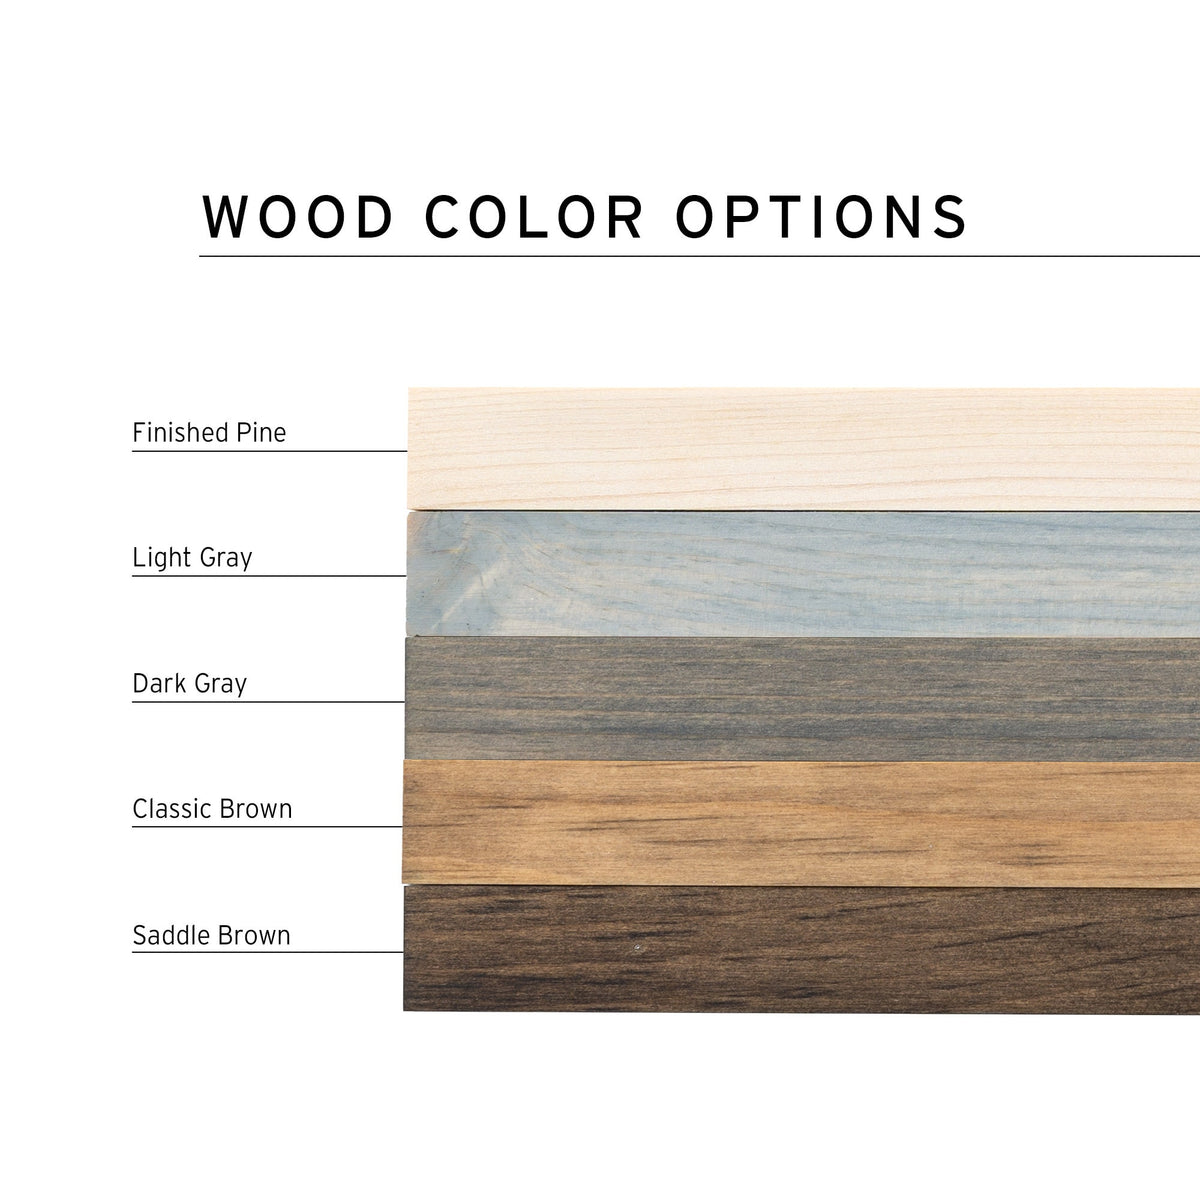 a wood color options chart for different types of wood